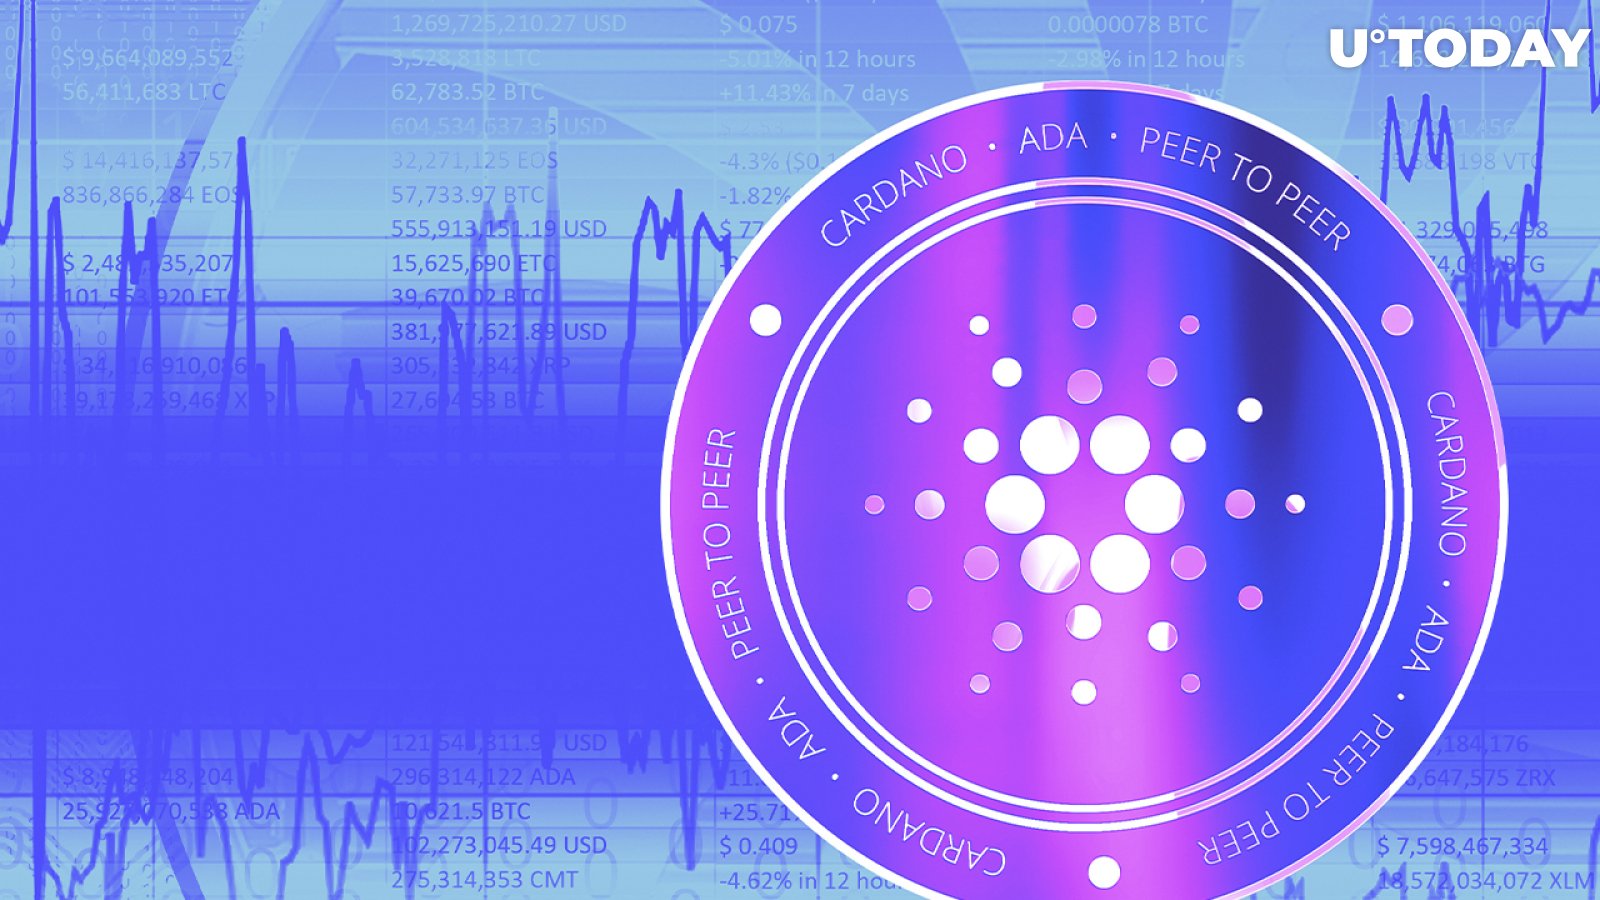 Cardano Network Transaction Count Spikes to 140,000 as Number of Projects On-chain Increases